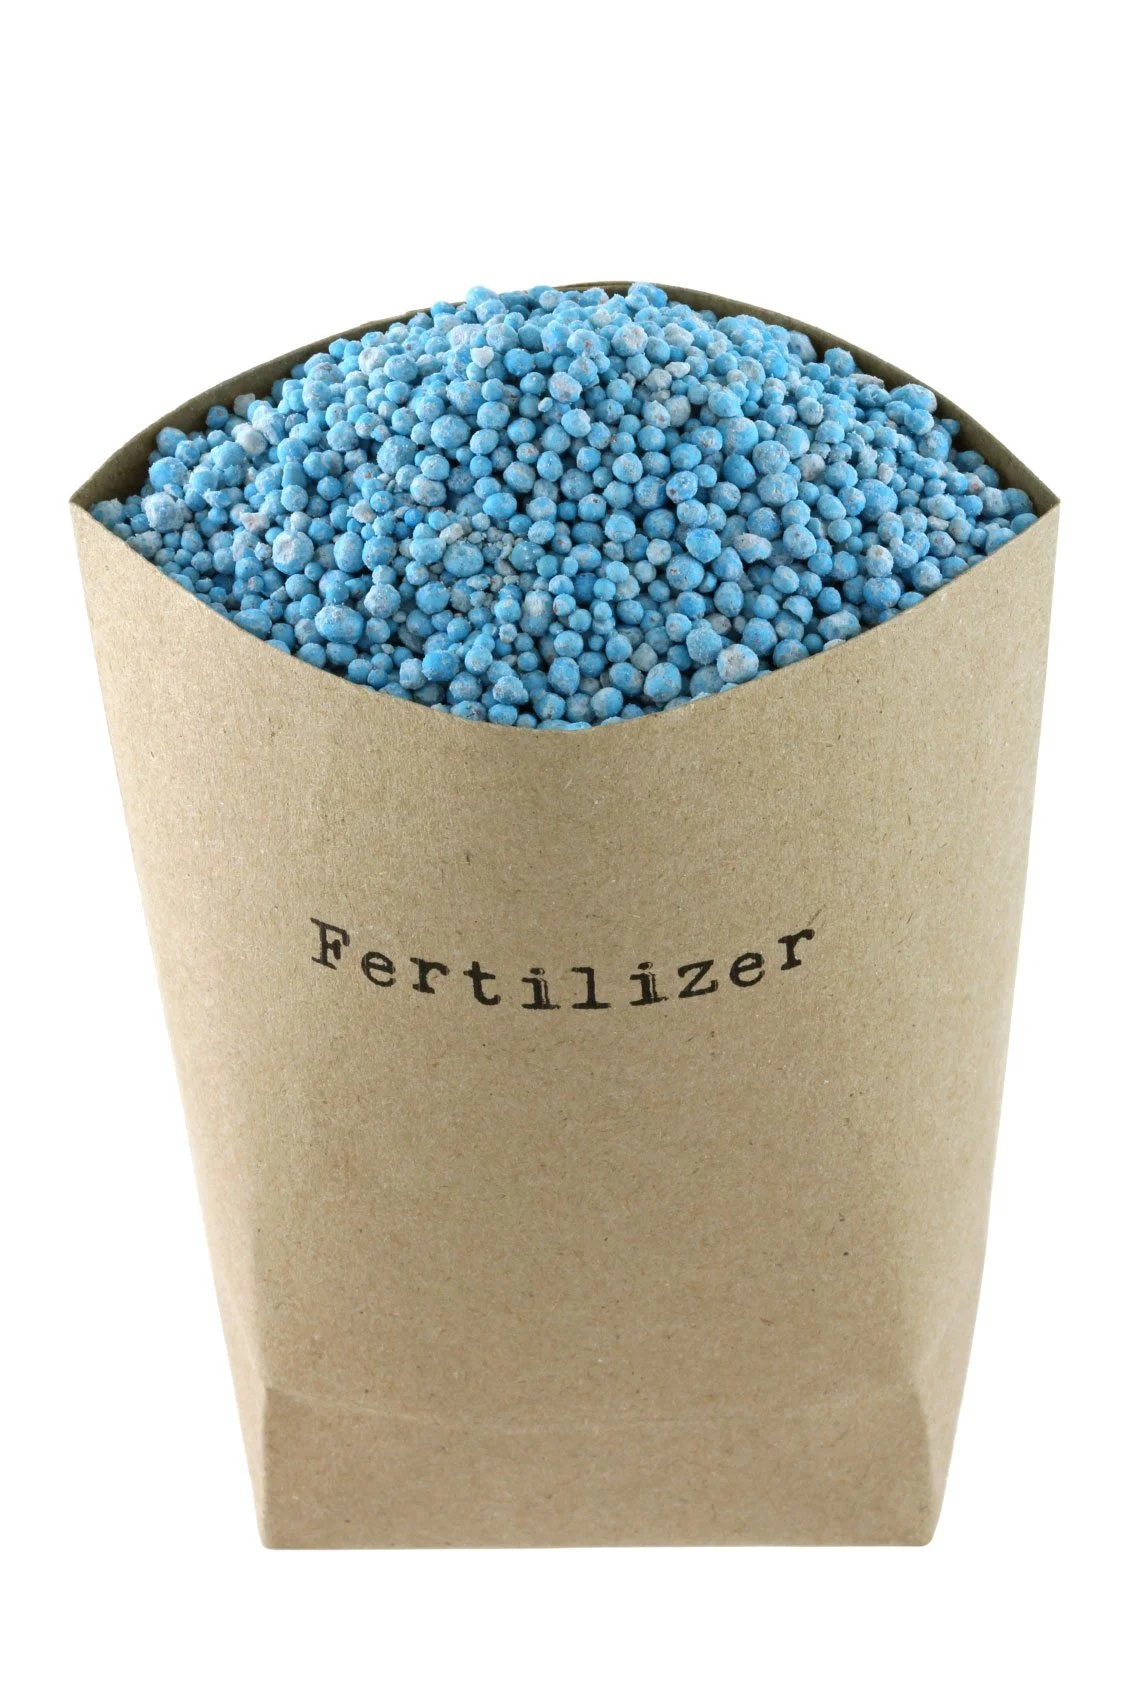 Indian Fertilizer Market 2023-2028: Industry Overview, Price Analysis, Drivers, Demand and Forecast Report